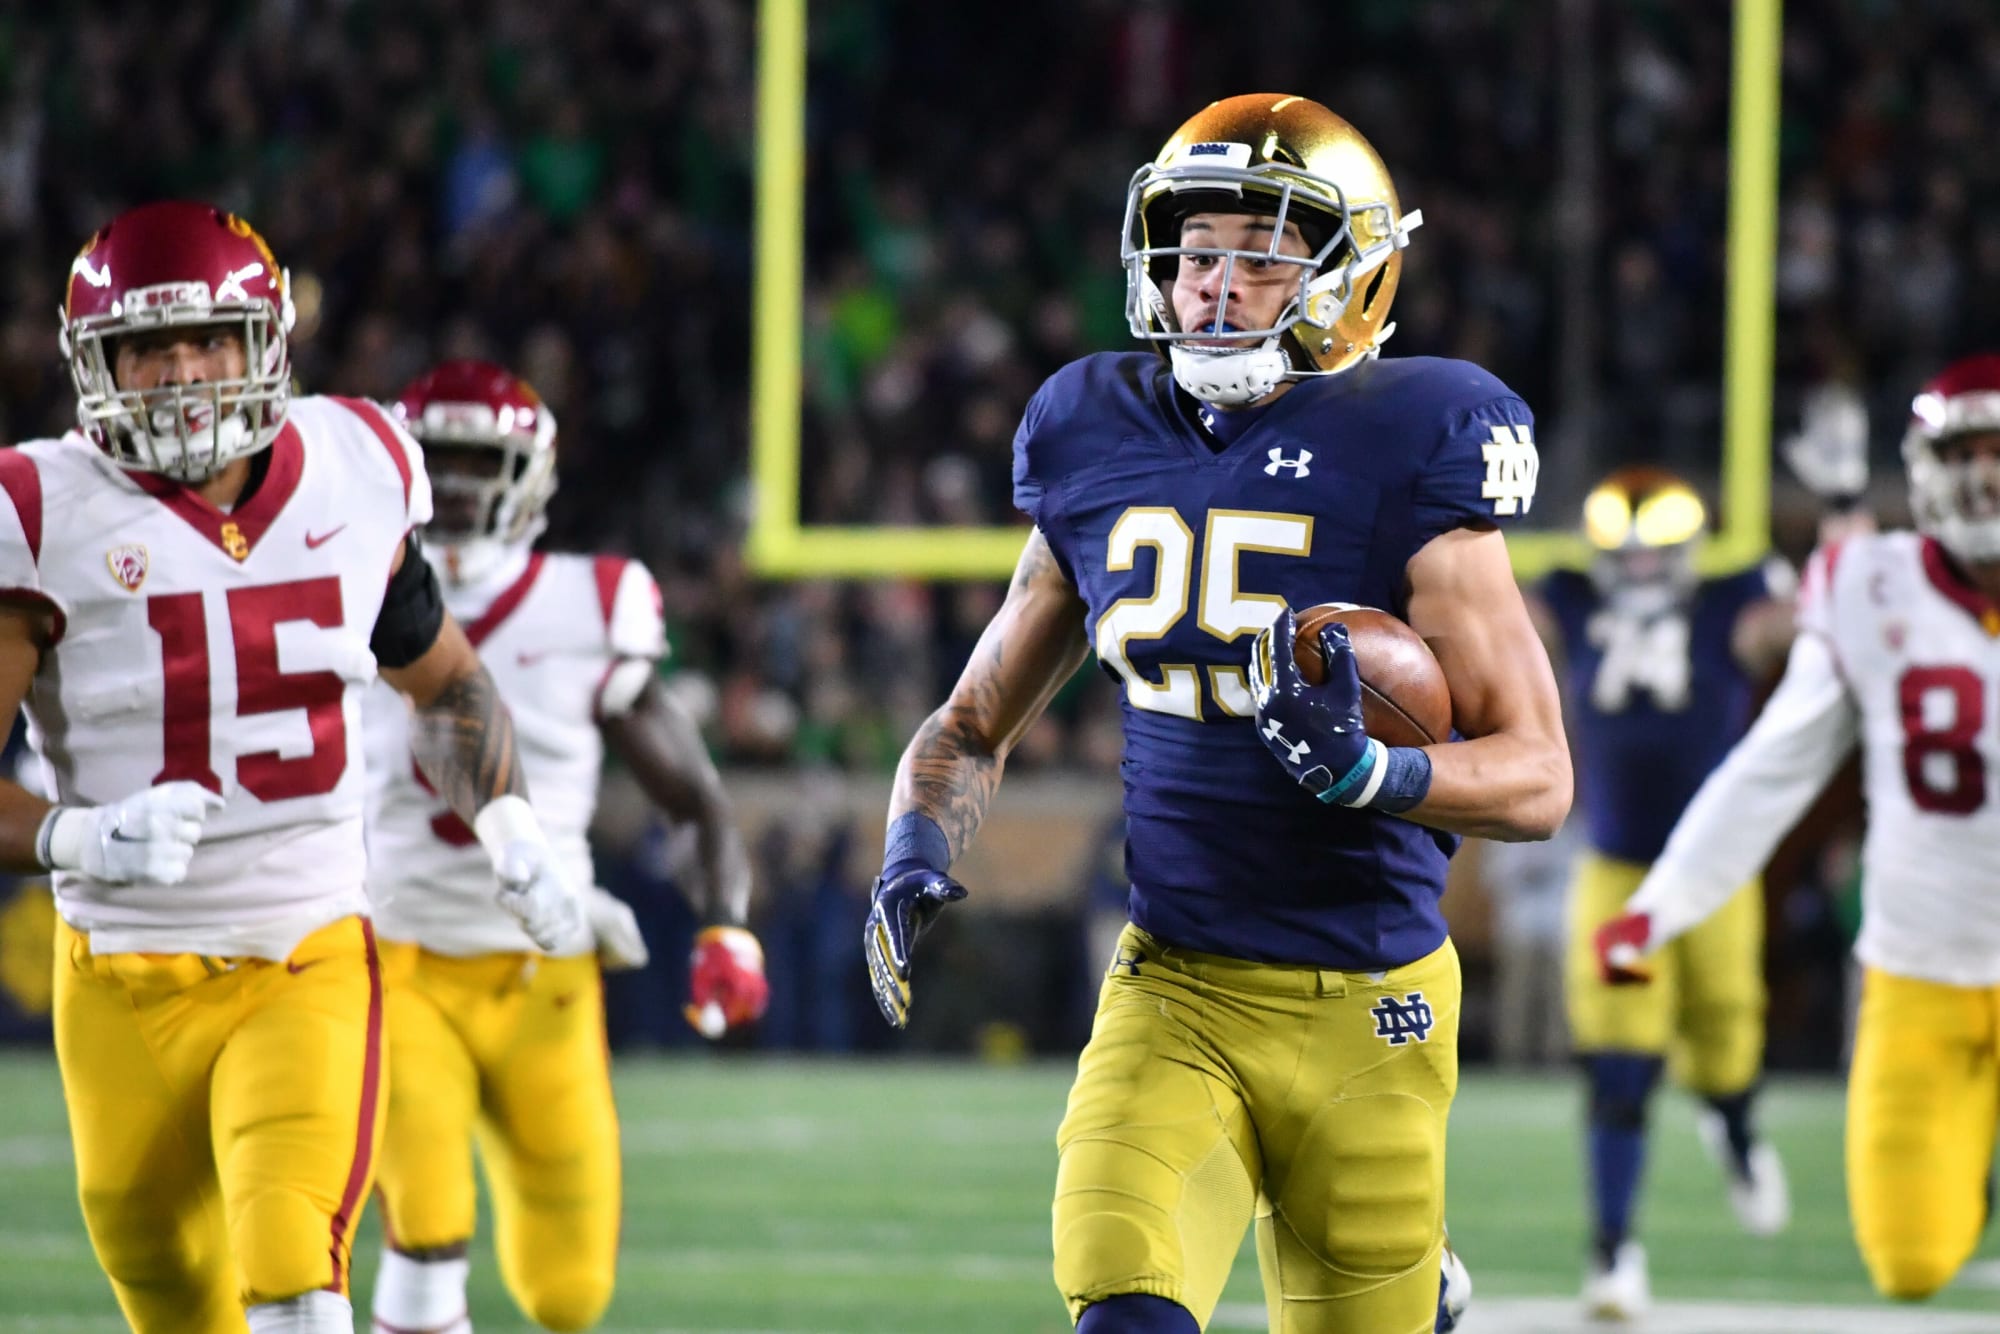 Notre Dame Football: Game-by-game predictions for 2021 season - Flipboard